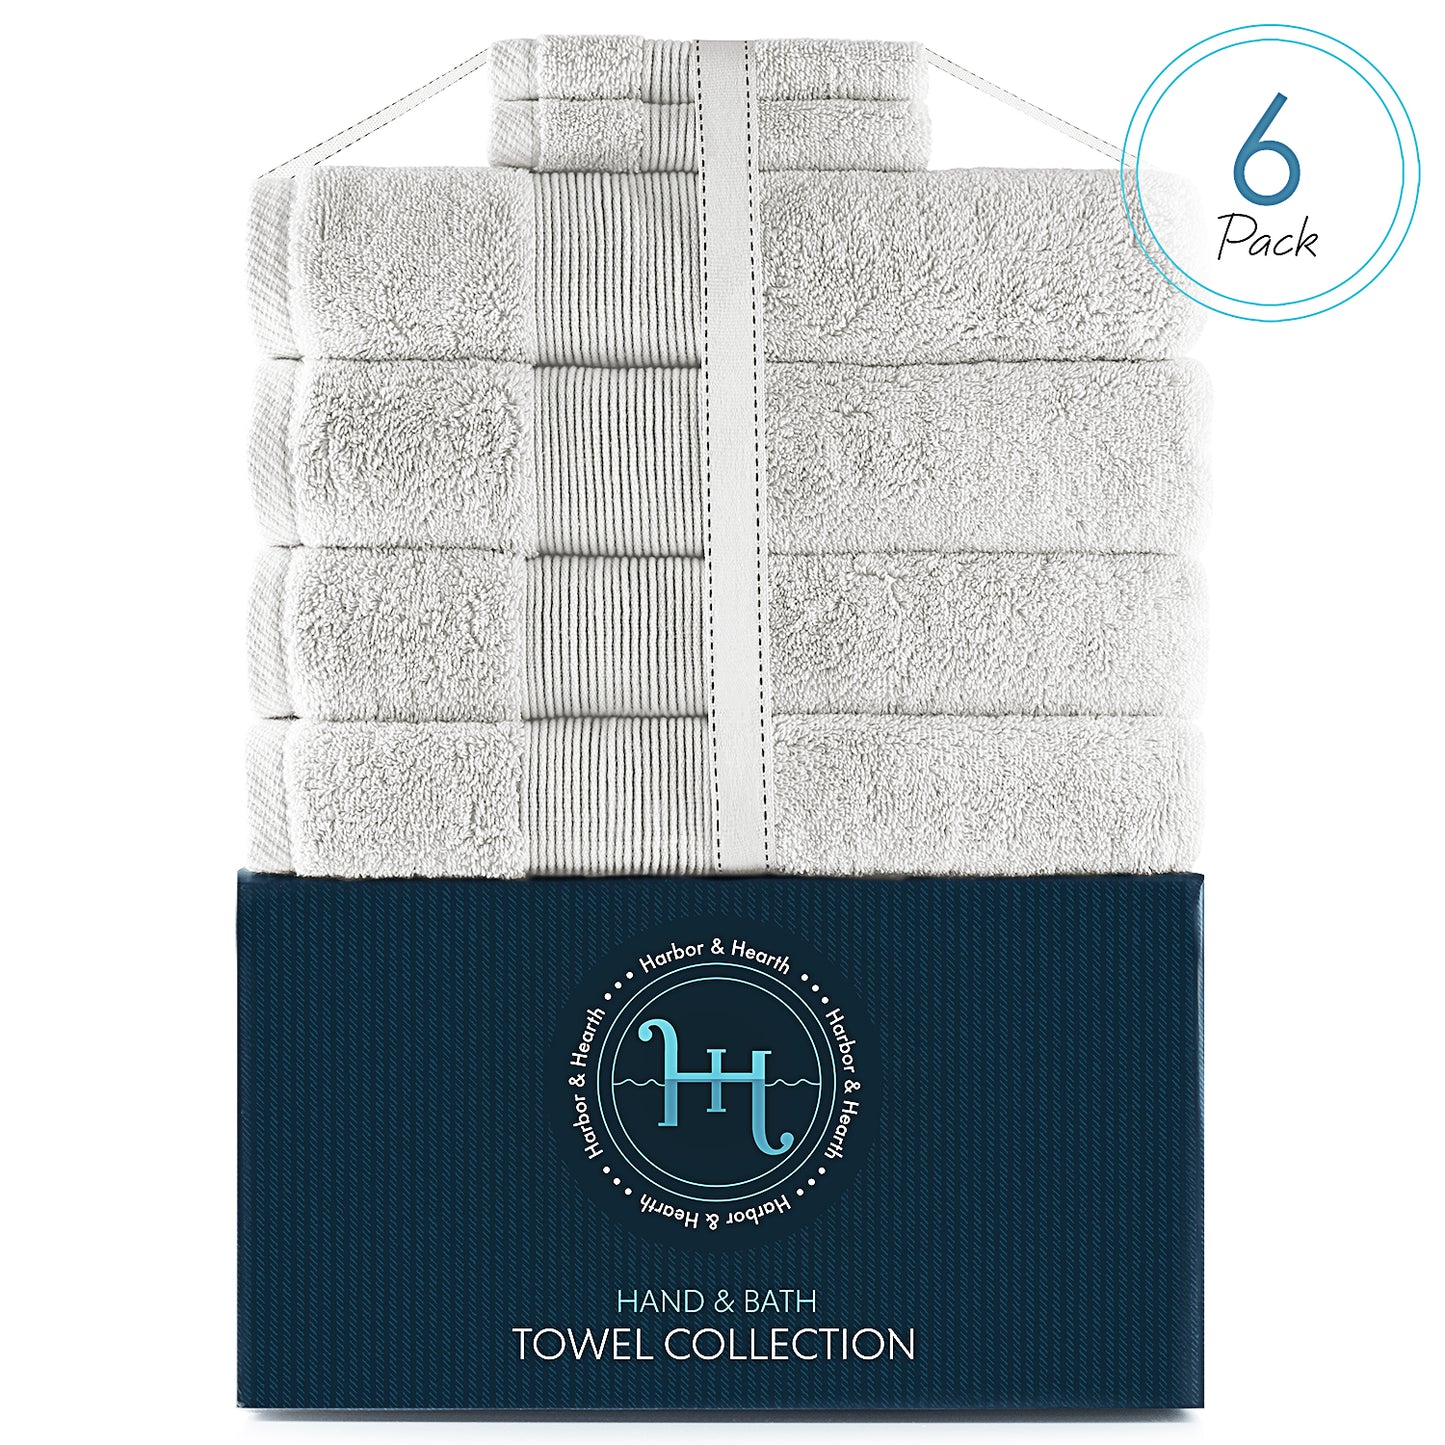 Hearth & Harbor 700 GSM Hand & Bath Towel Collection – 100% Cotton Luxury Set of 4 Bath Towels & 2 Wash Cloths – Ultra Soft & Highly Absorbent Beach, Spa & Bathroom Body Shower Towels